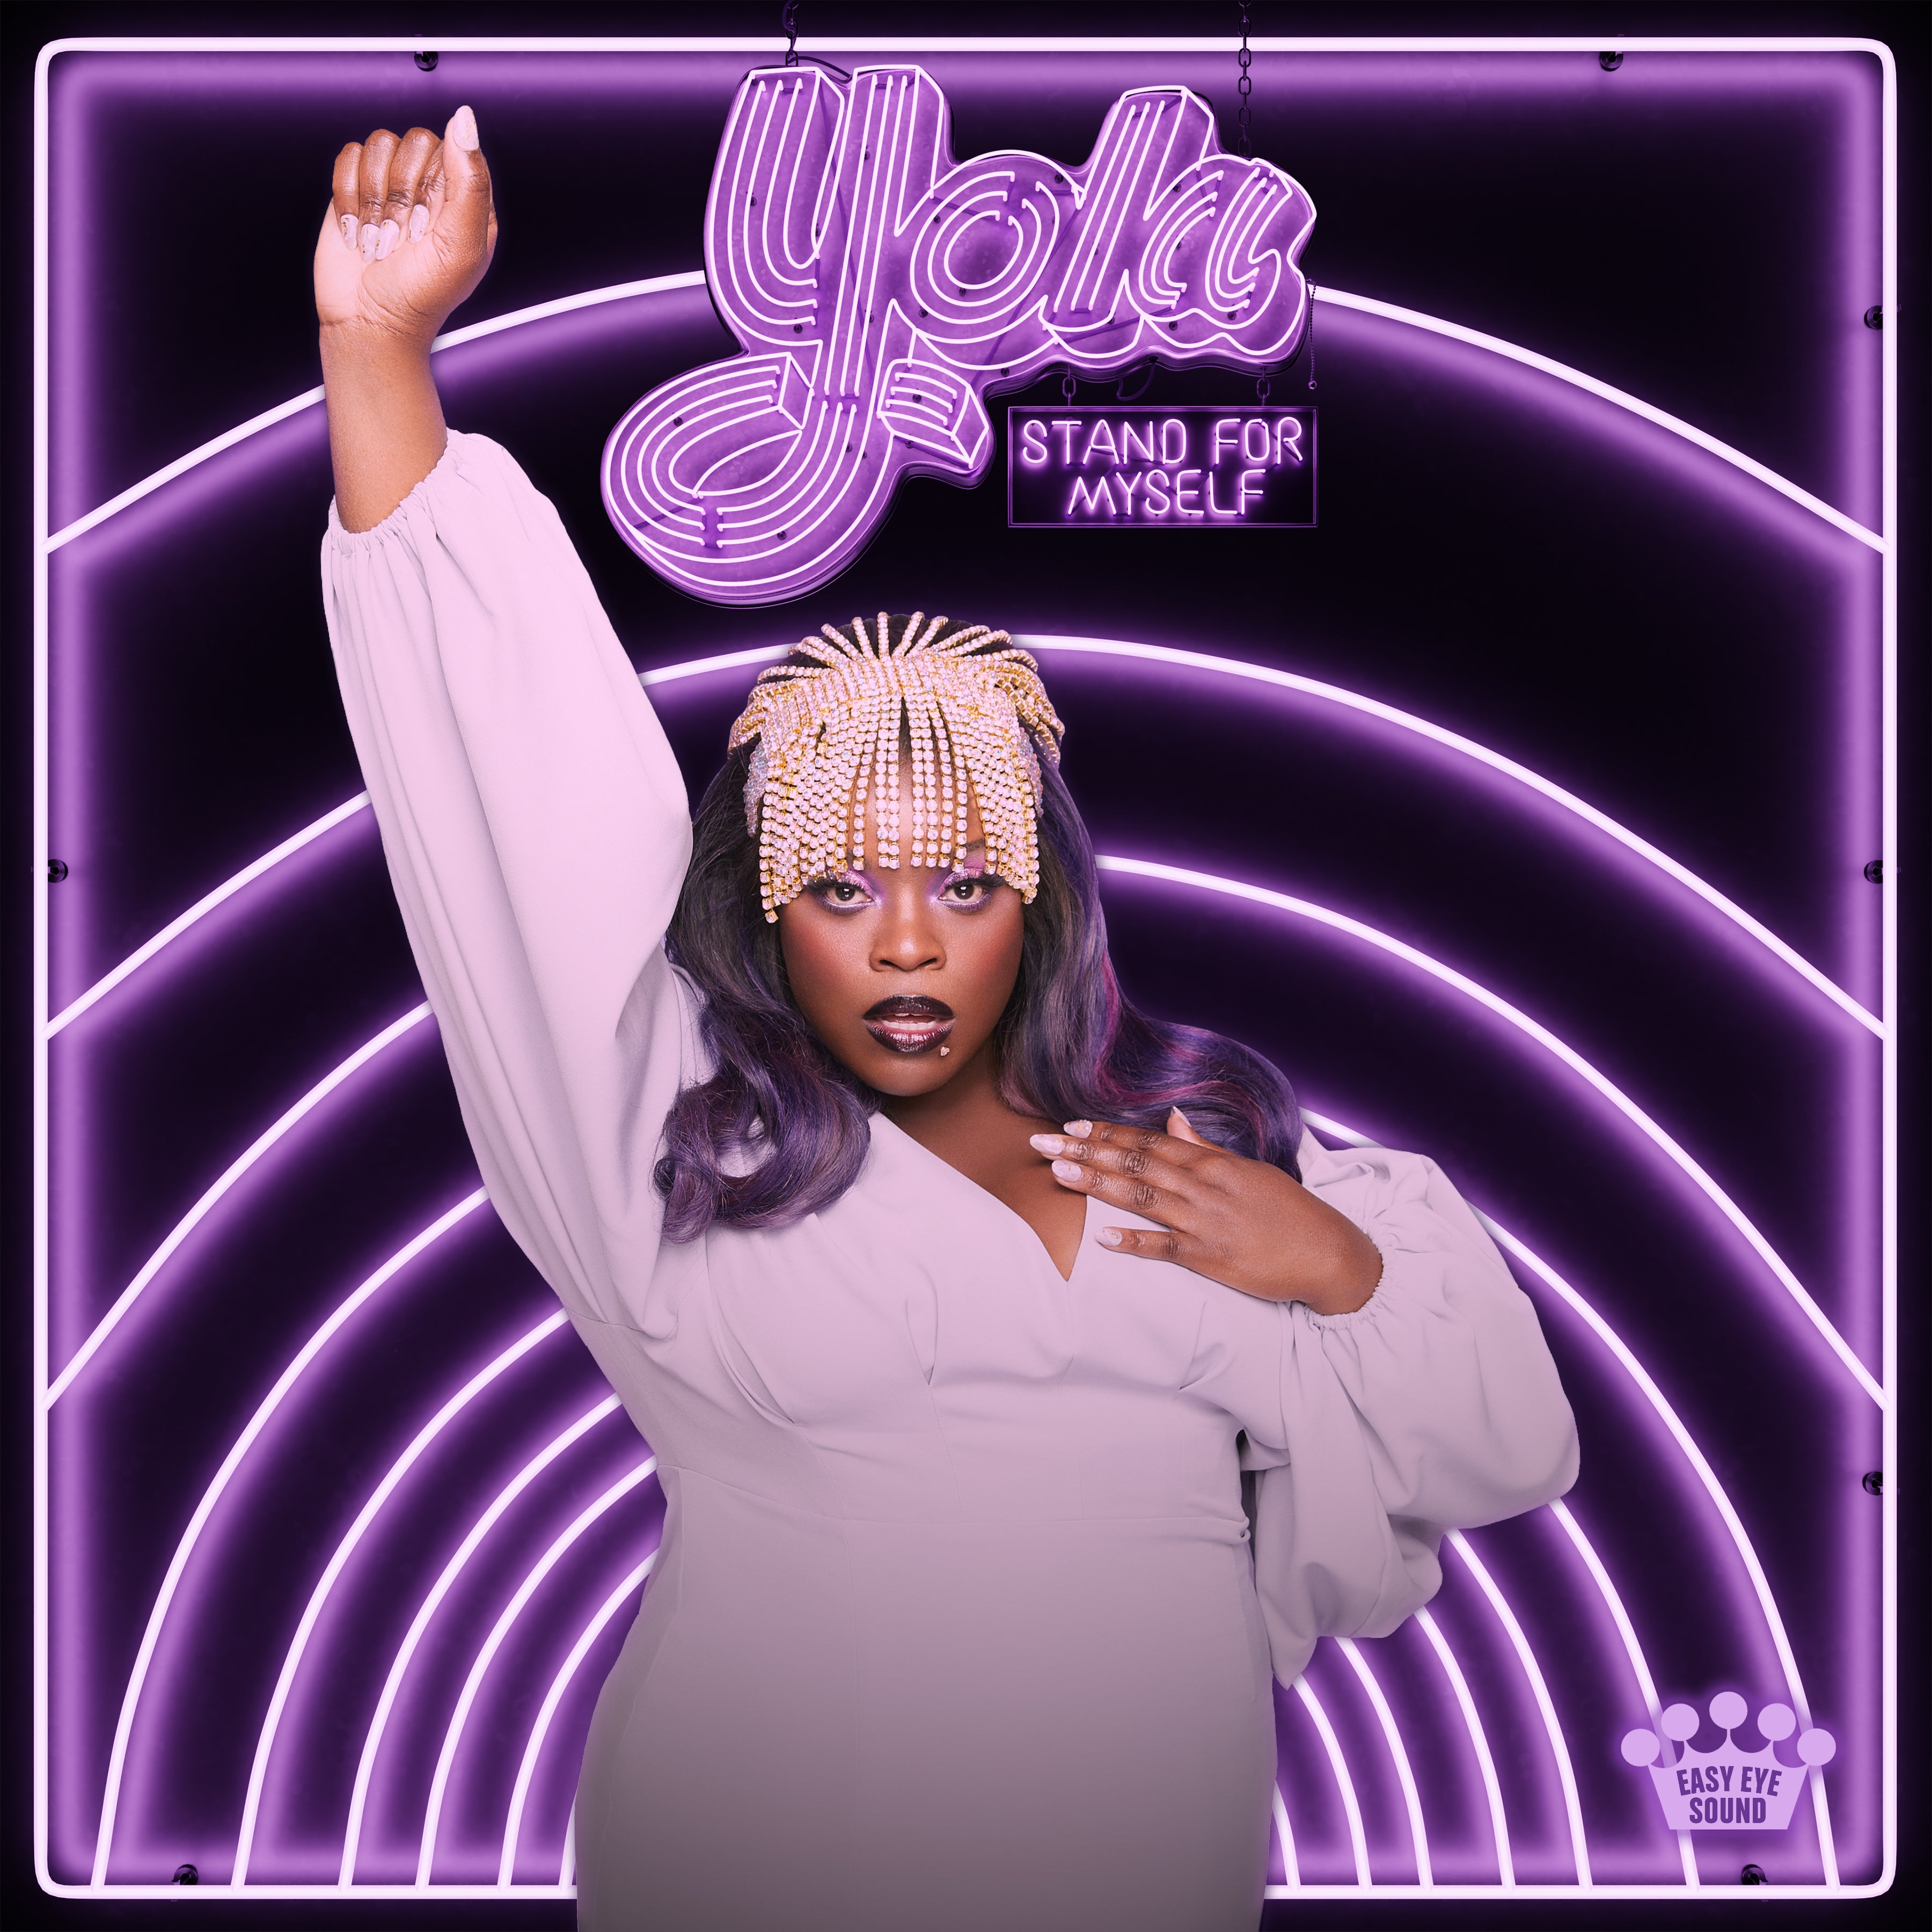 NEW ALBUM FROM YOLA, ‘STAND FOR MYSELF’, OUT JULY 30